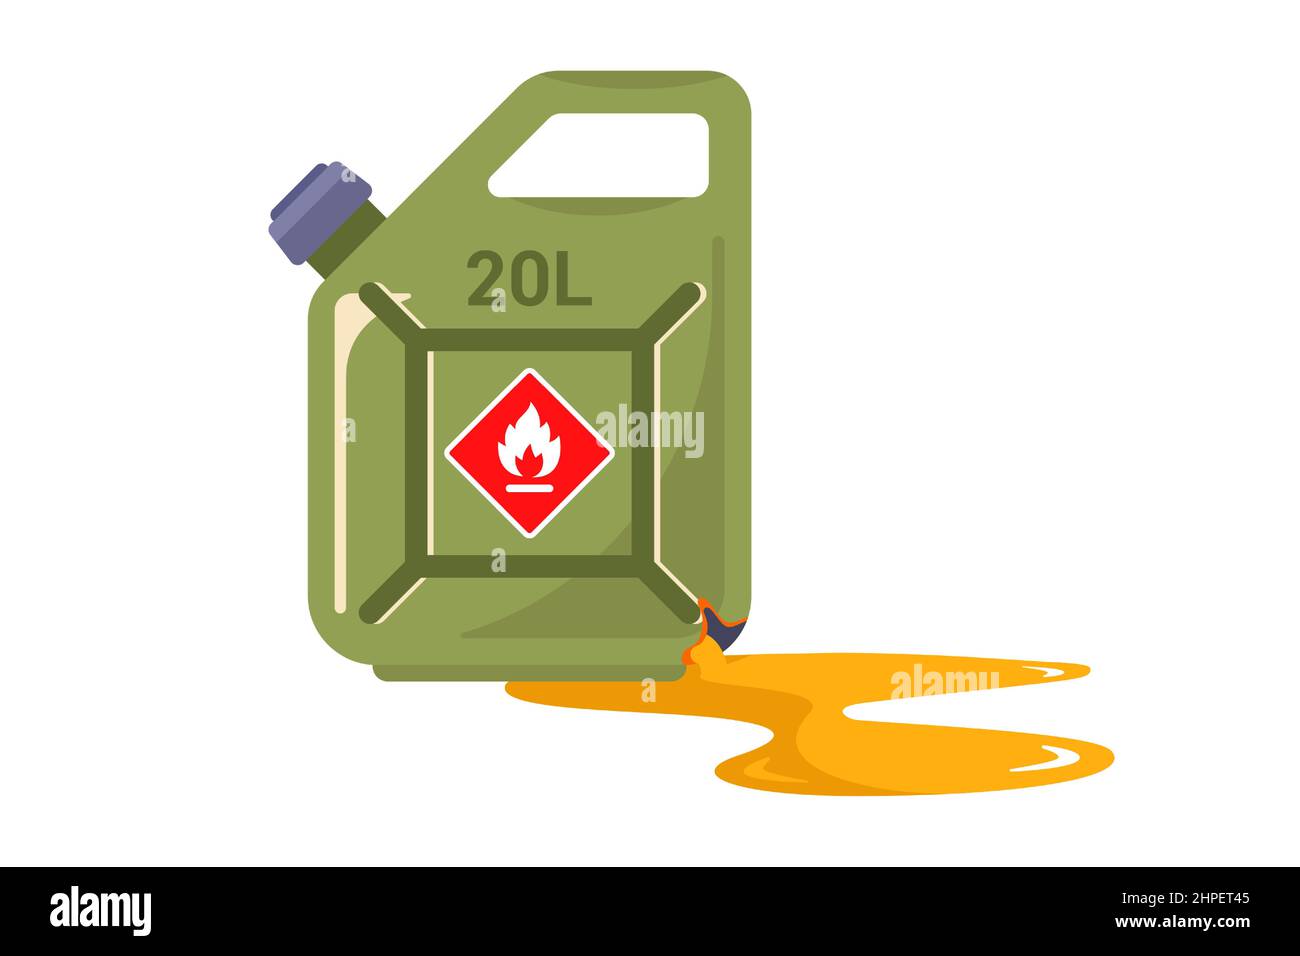 the gas canister is leaking. leakage of flammable liquid. flat vector illustration. Stock Vector